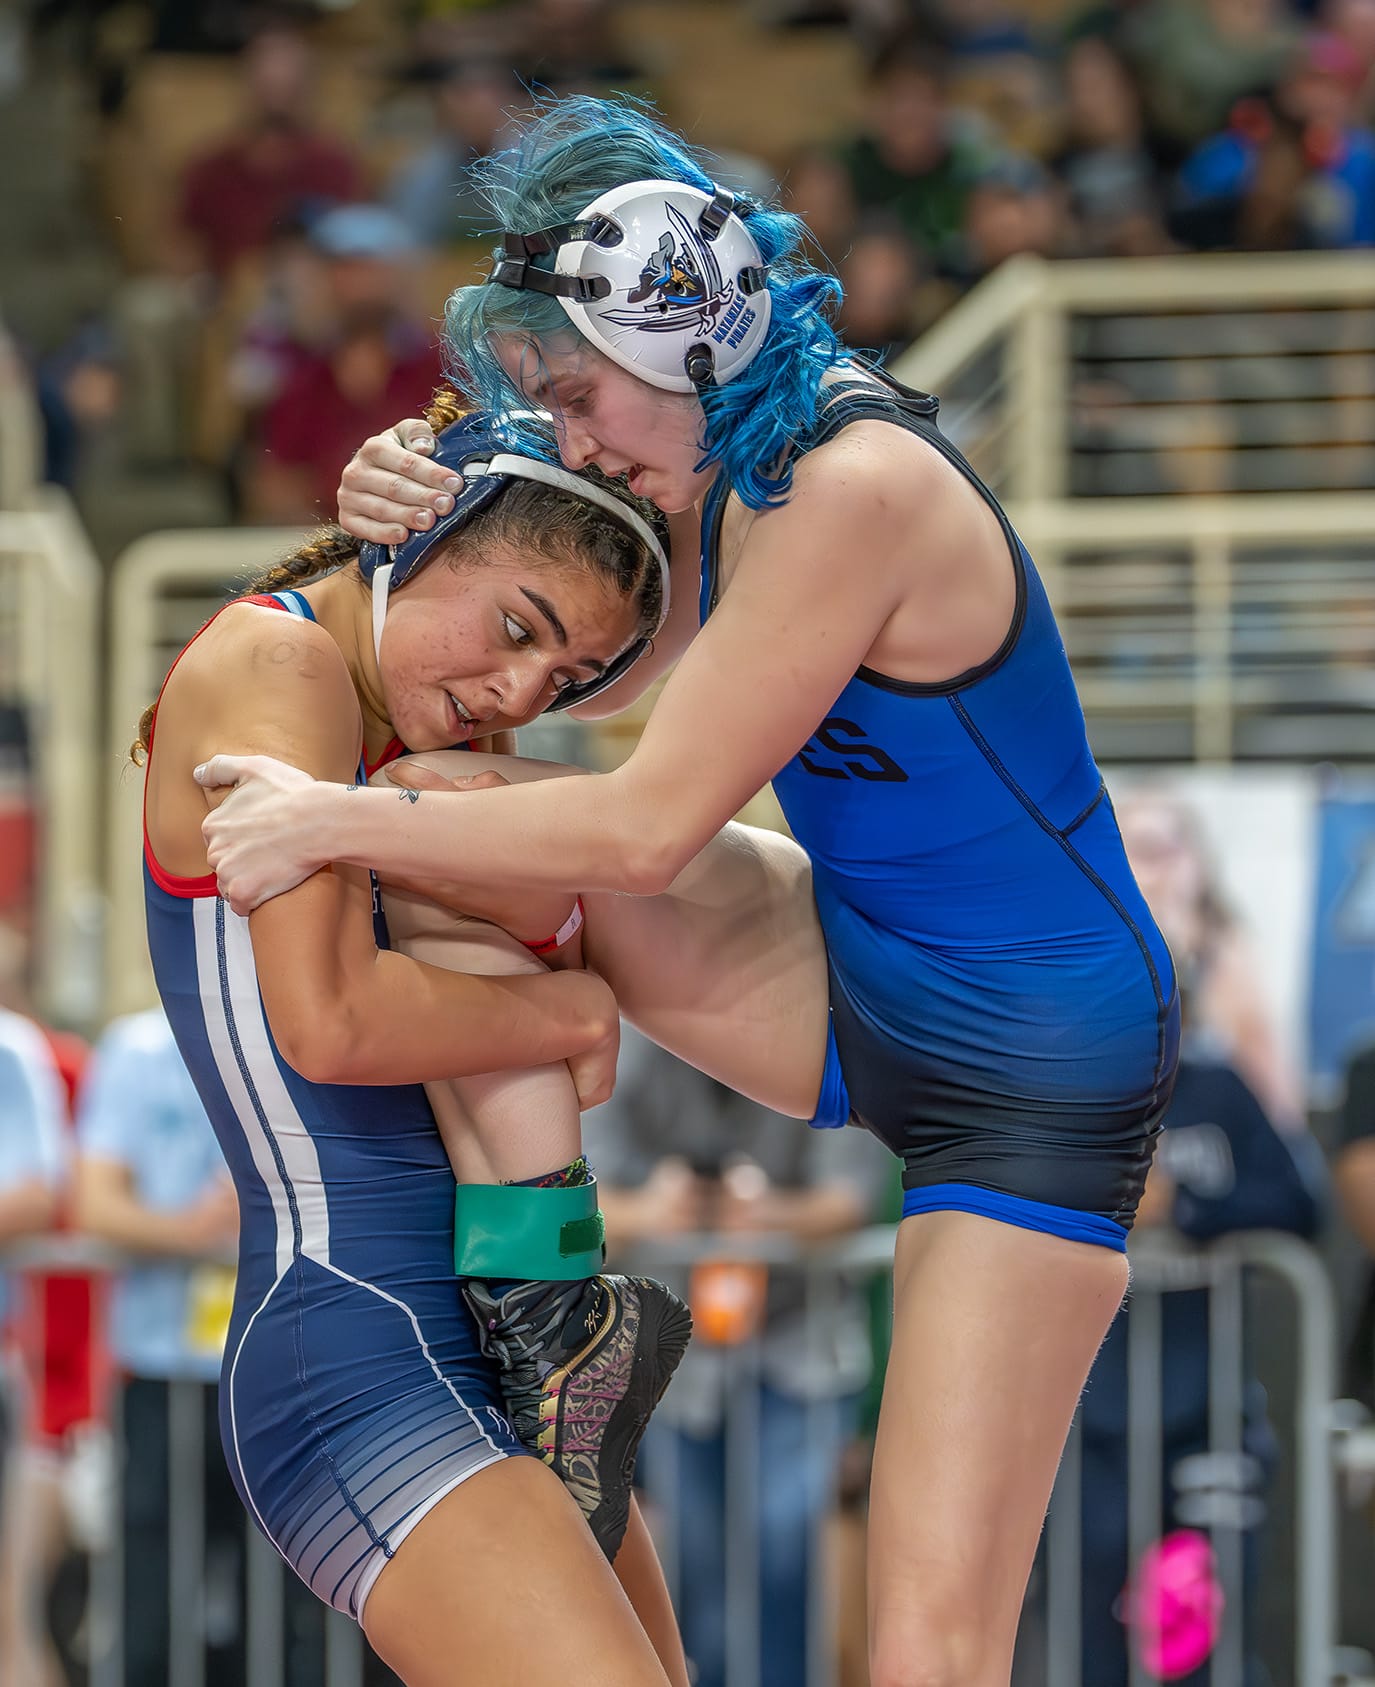 Springstead High 105 pound Gianella Walczak won against Jaclyn Golden from Matanzas High 14-5 in the first round of the FHSAA State Championships in Kissimmee. [Photo by Joe DiCristofalo]